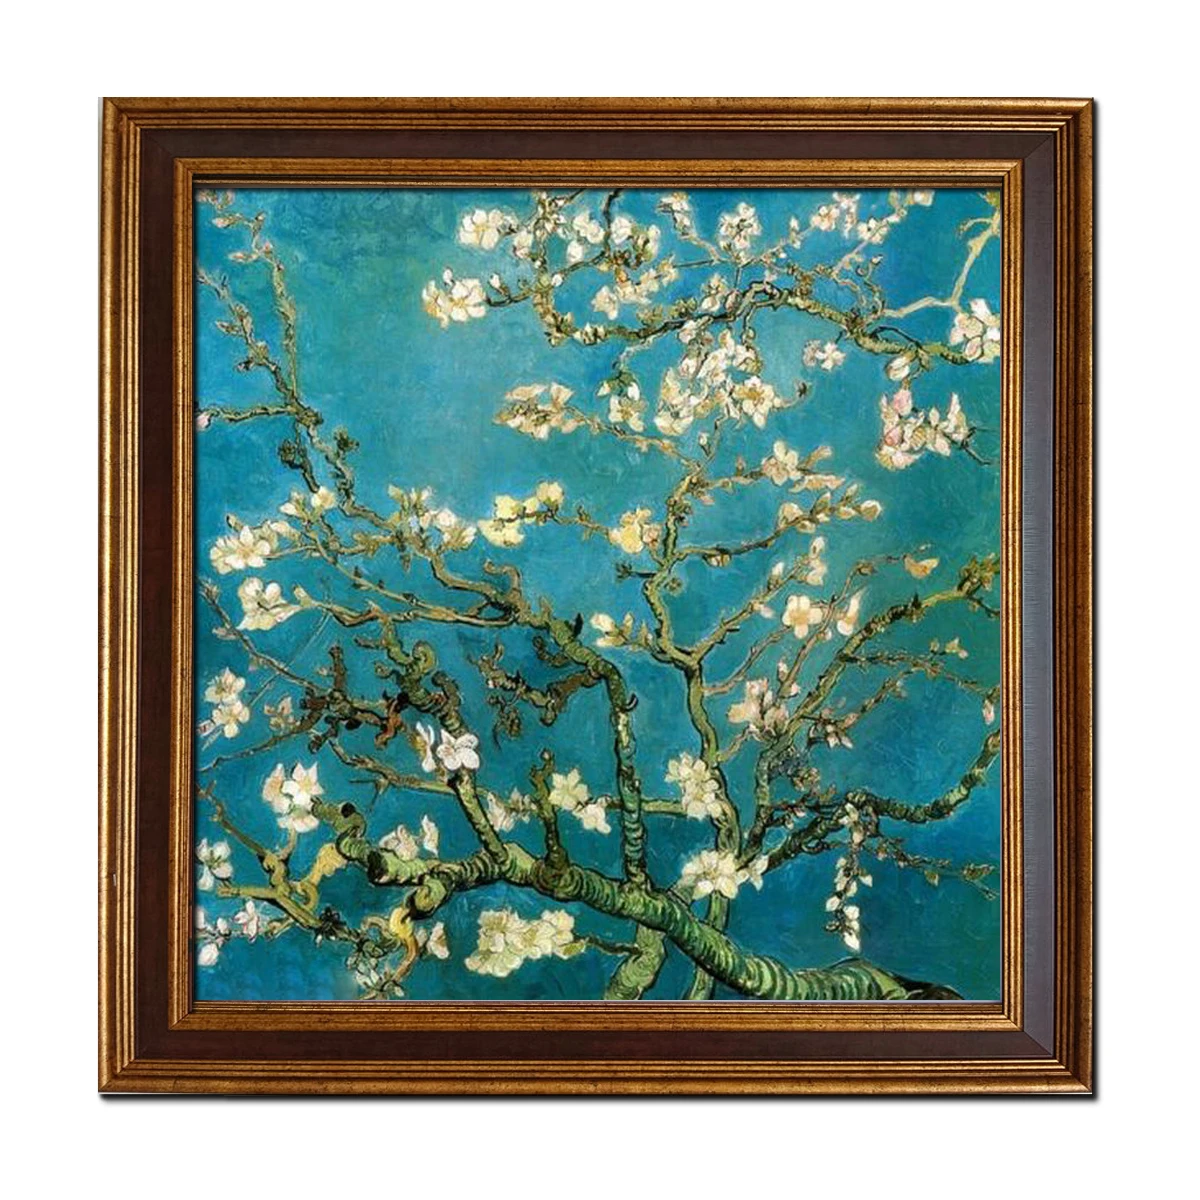 

Golden Framed-Van Gogh Almond Branches in Bloom Oil Painting Hand Painted on Canvas Repro Wall Art Decor